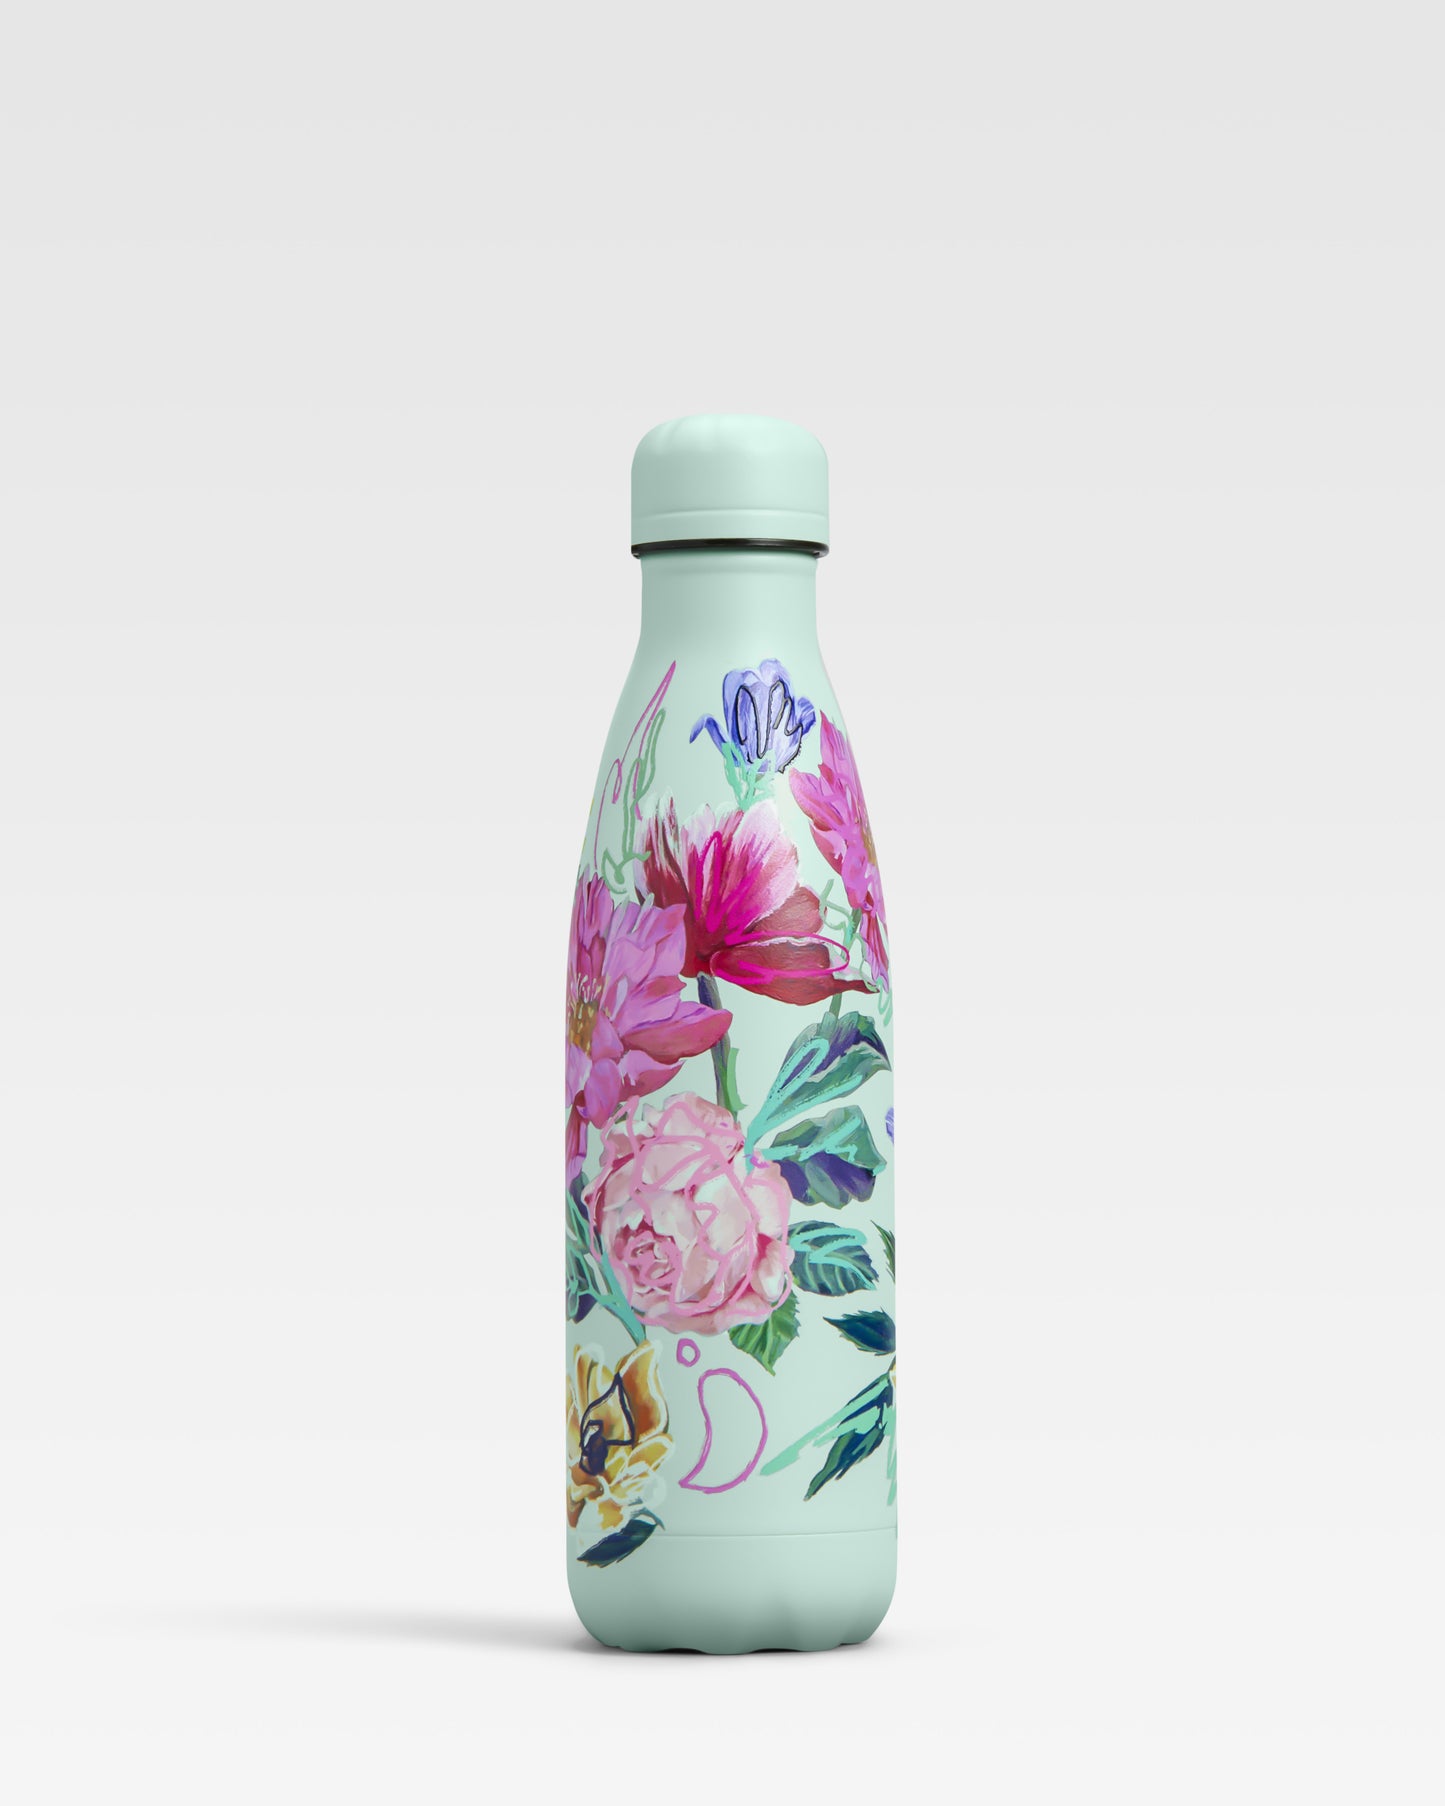 Floral, 500ml, Art Attack